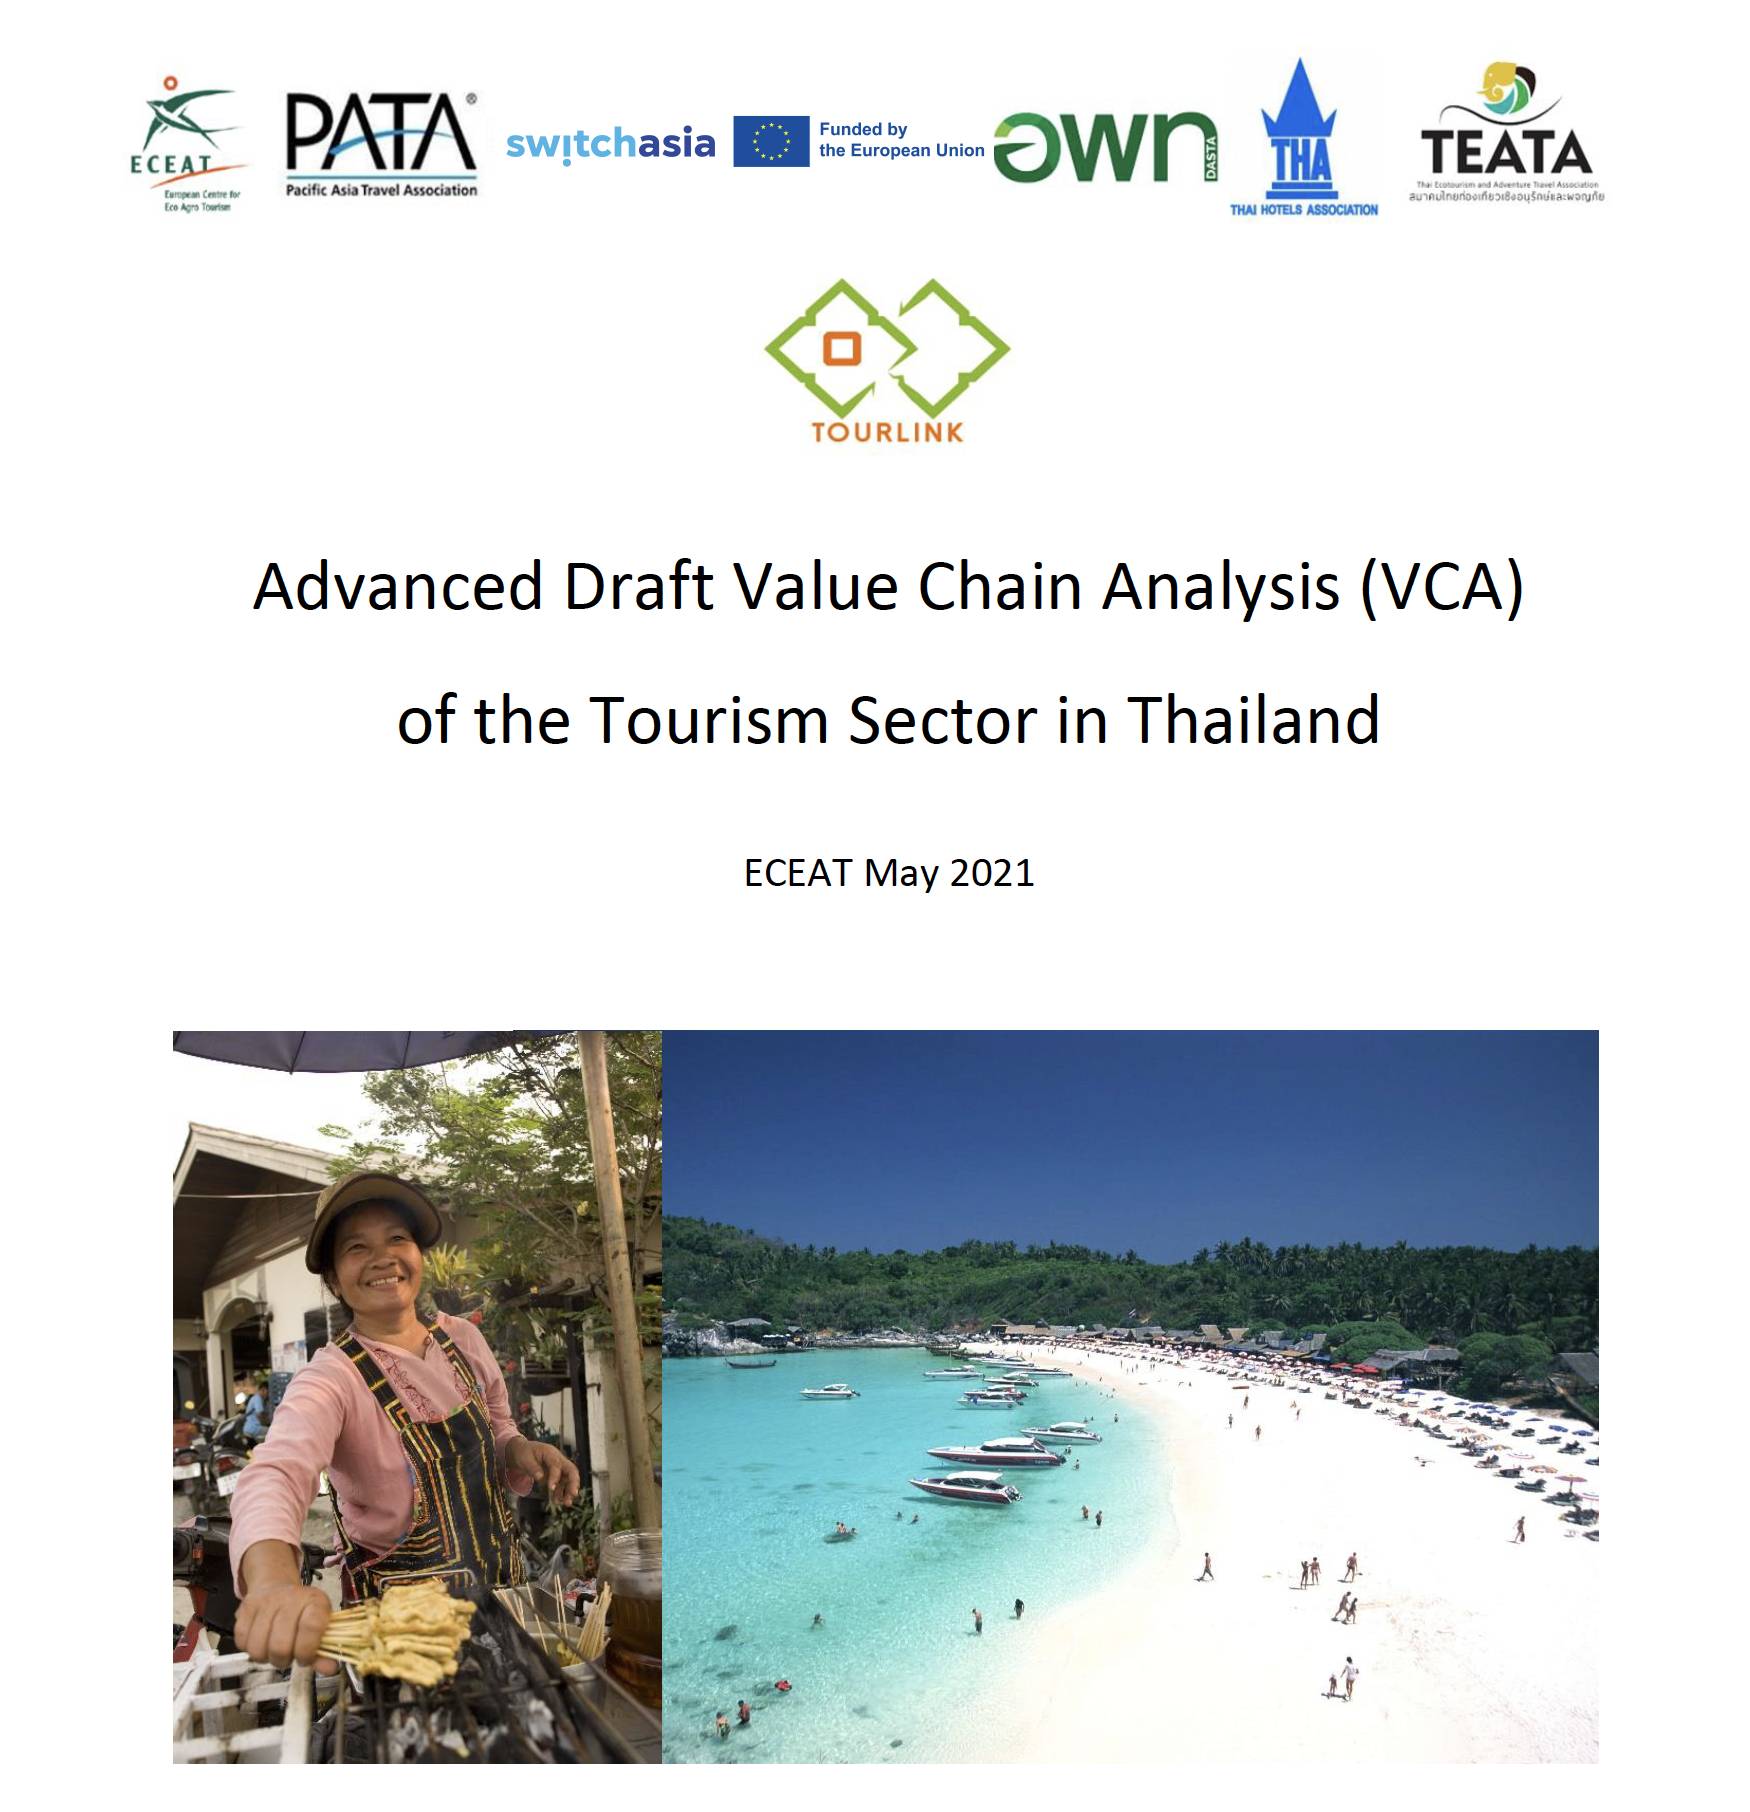 Advanced Draft Value Chain Analysis (VCA) of the Tourism Sector in Thailand